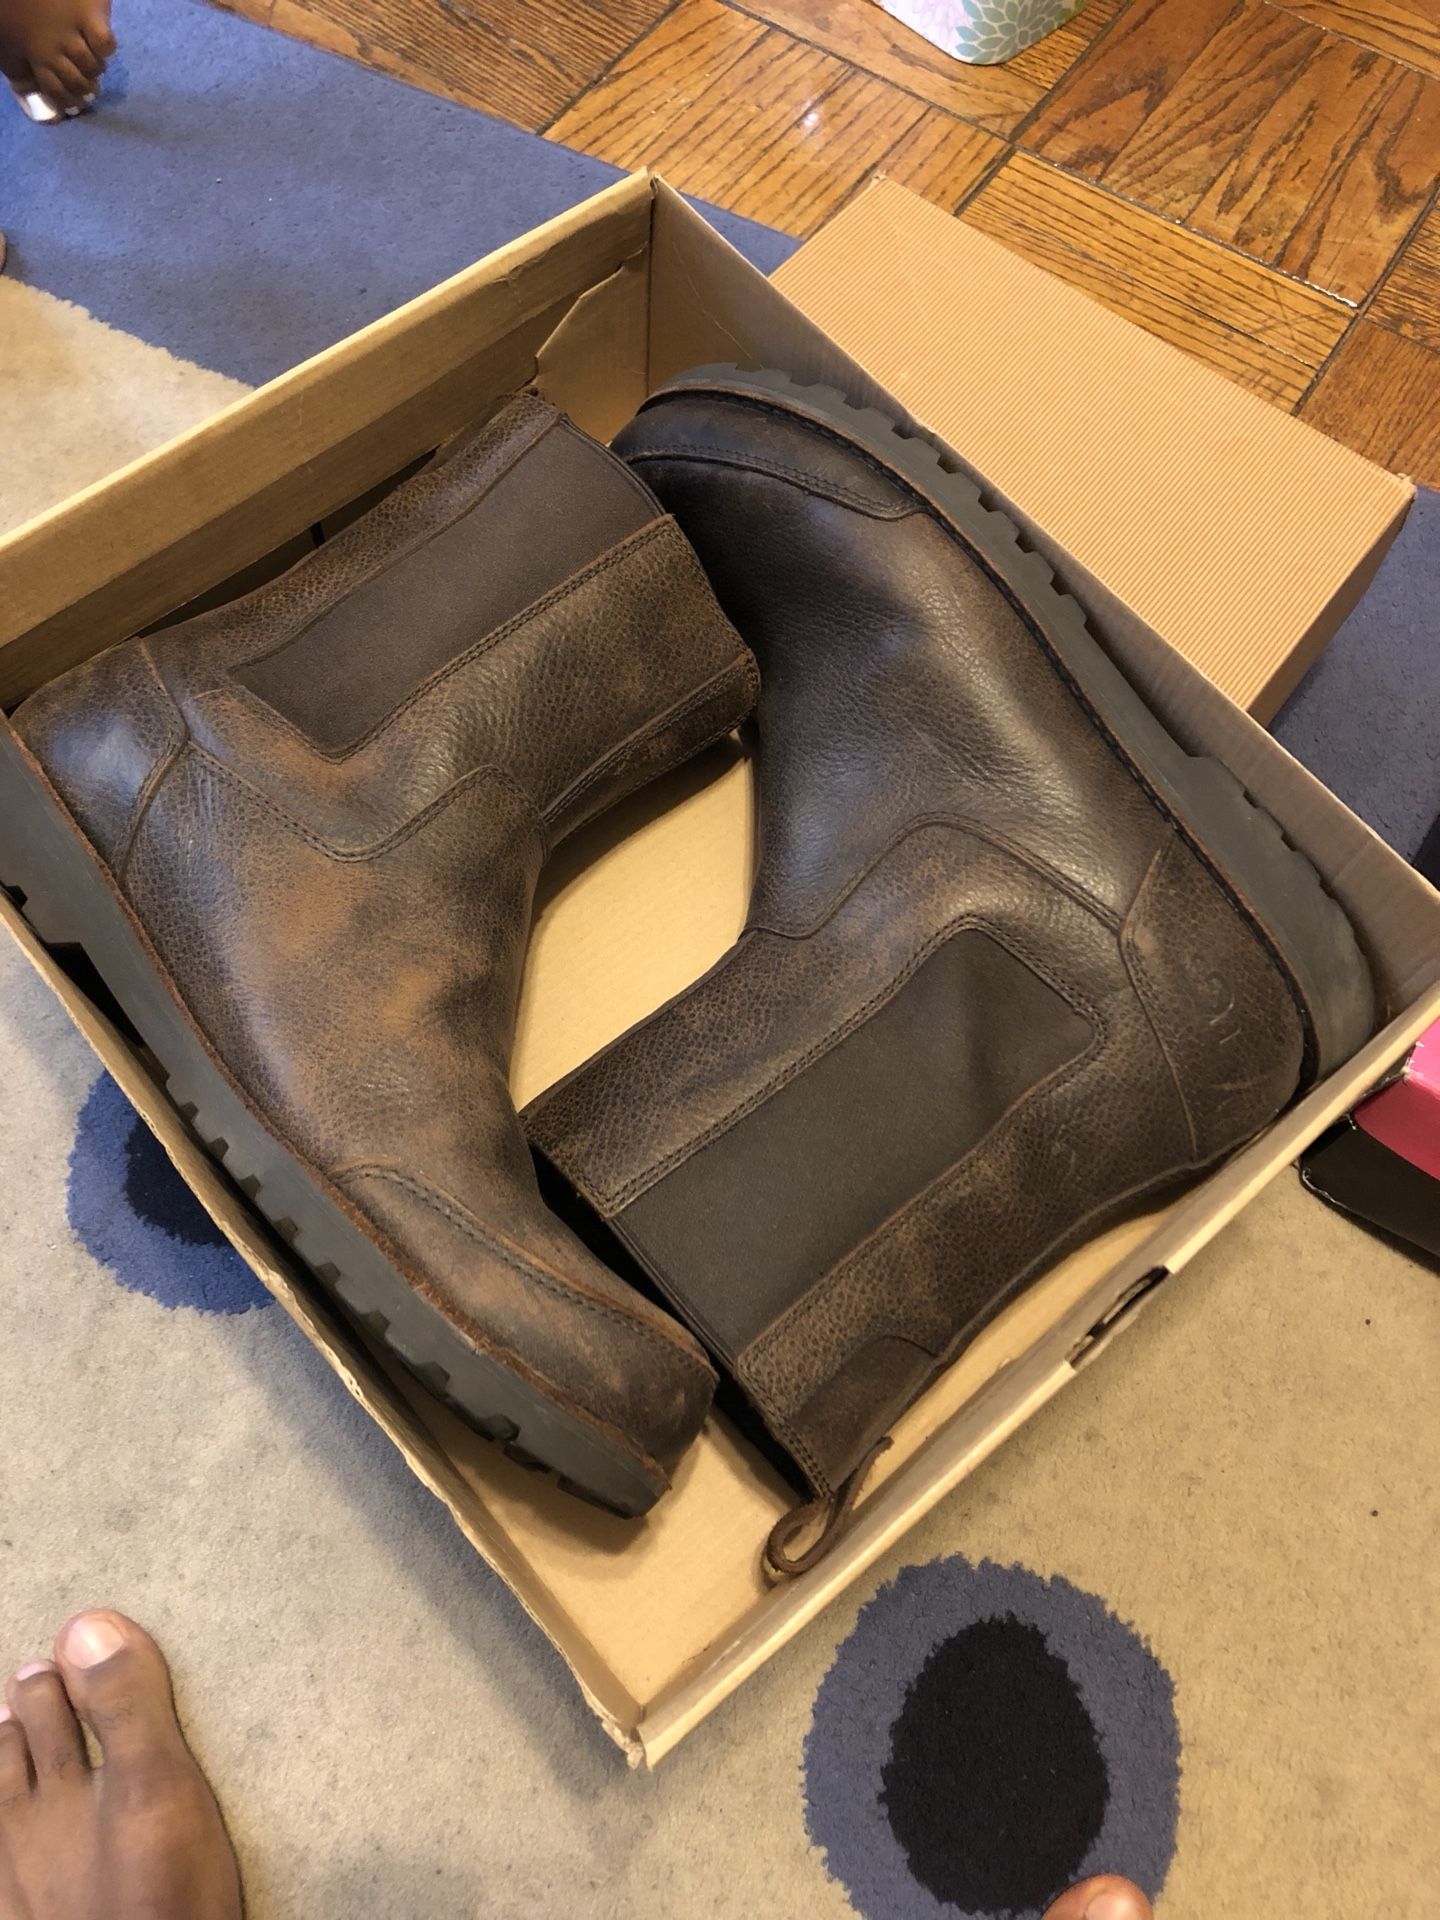 Men’s ugg boot size 12 $20 firm lightly worn. Today only